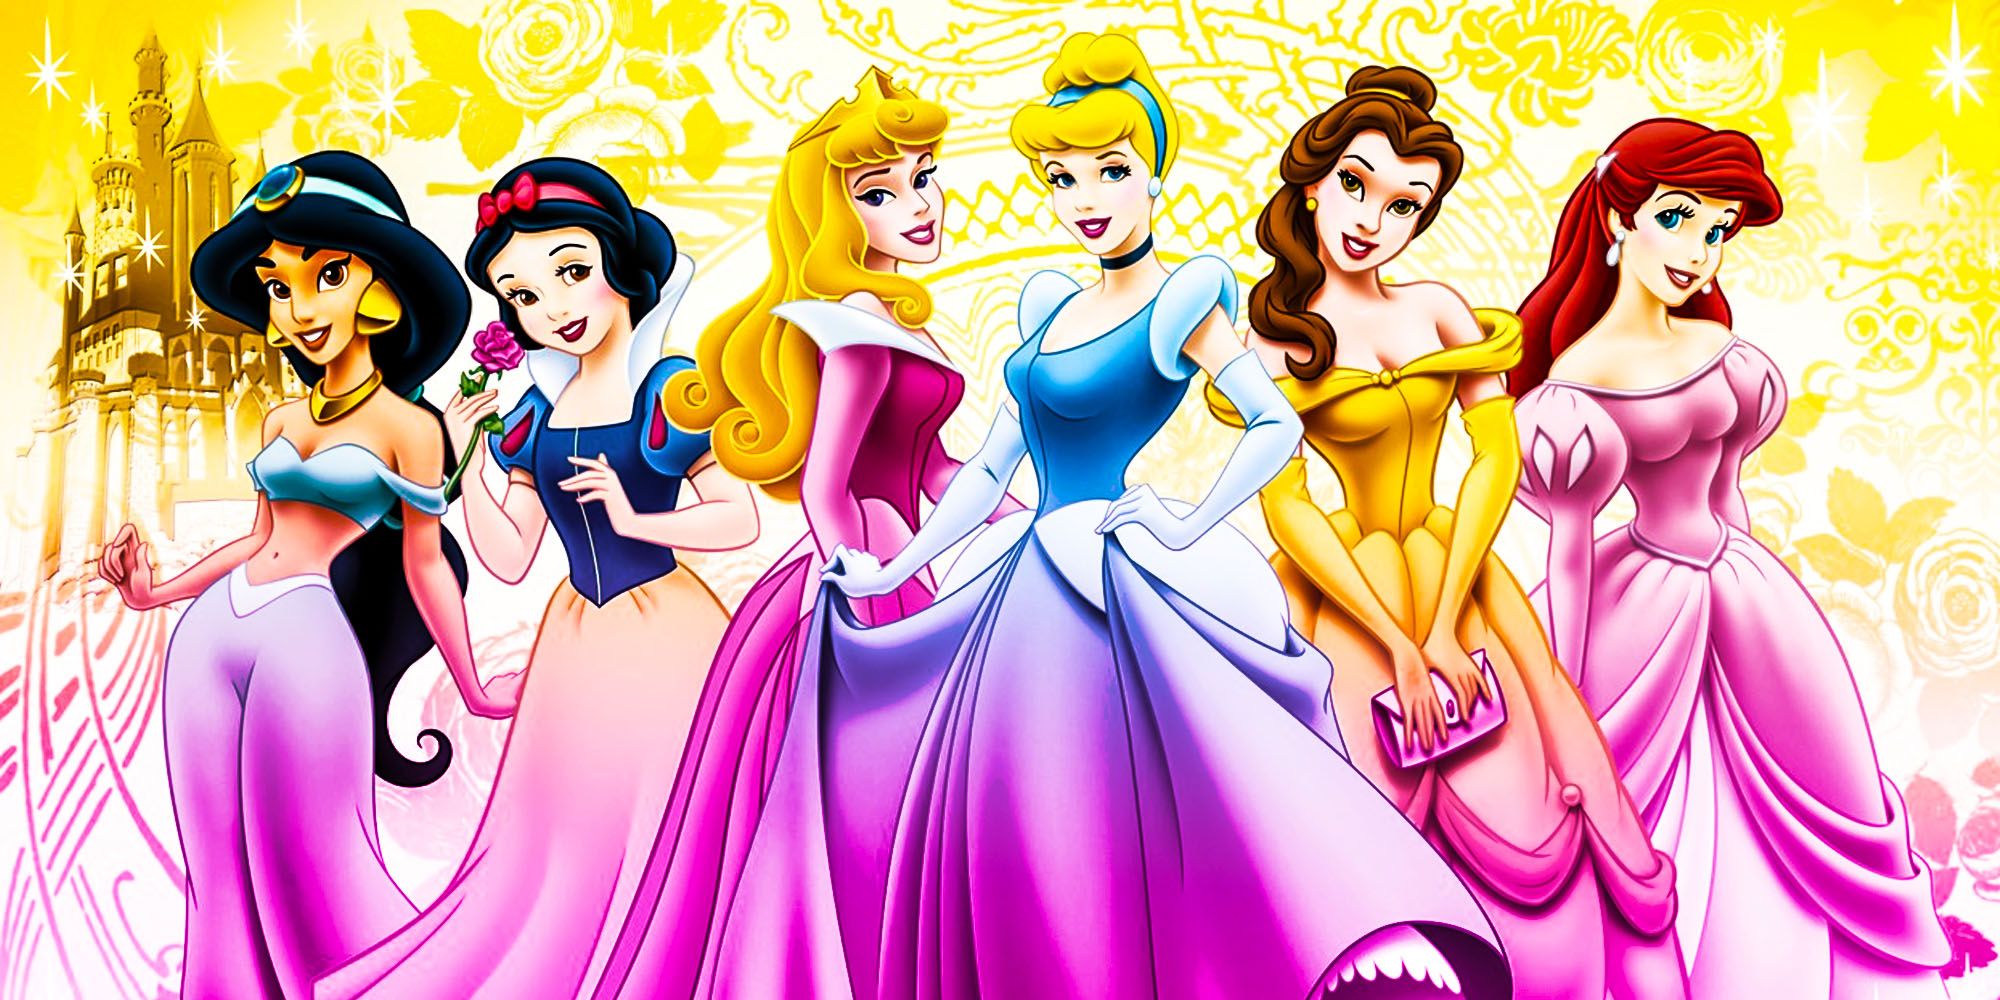 Beauty Cartoon Characters Poster Princess Disney Picture Animation Royality 